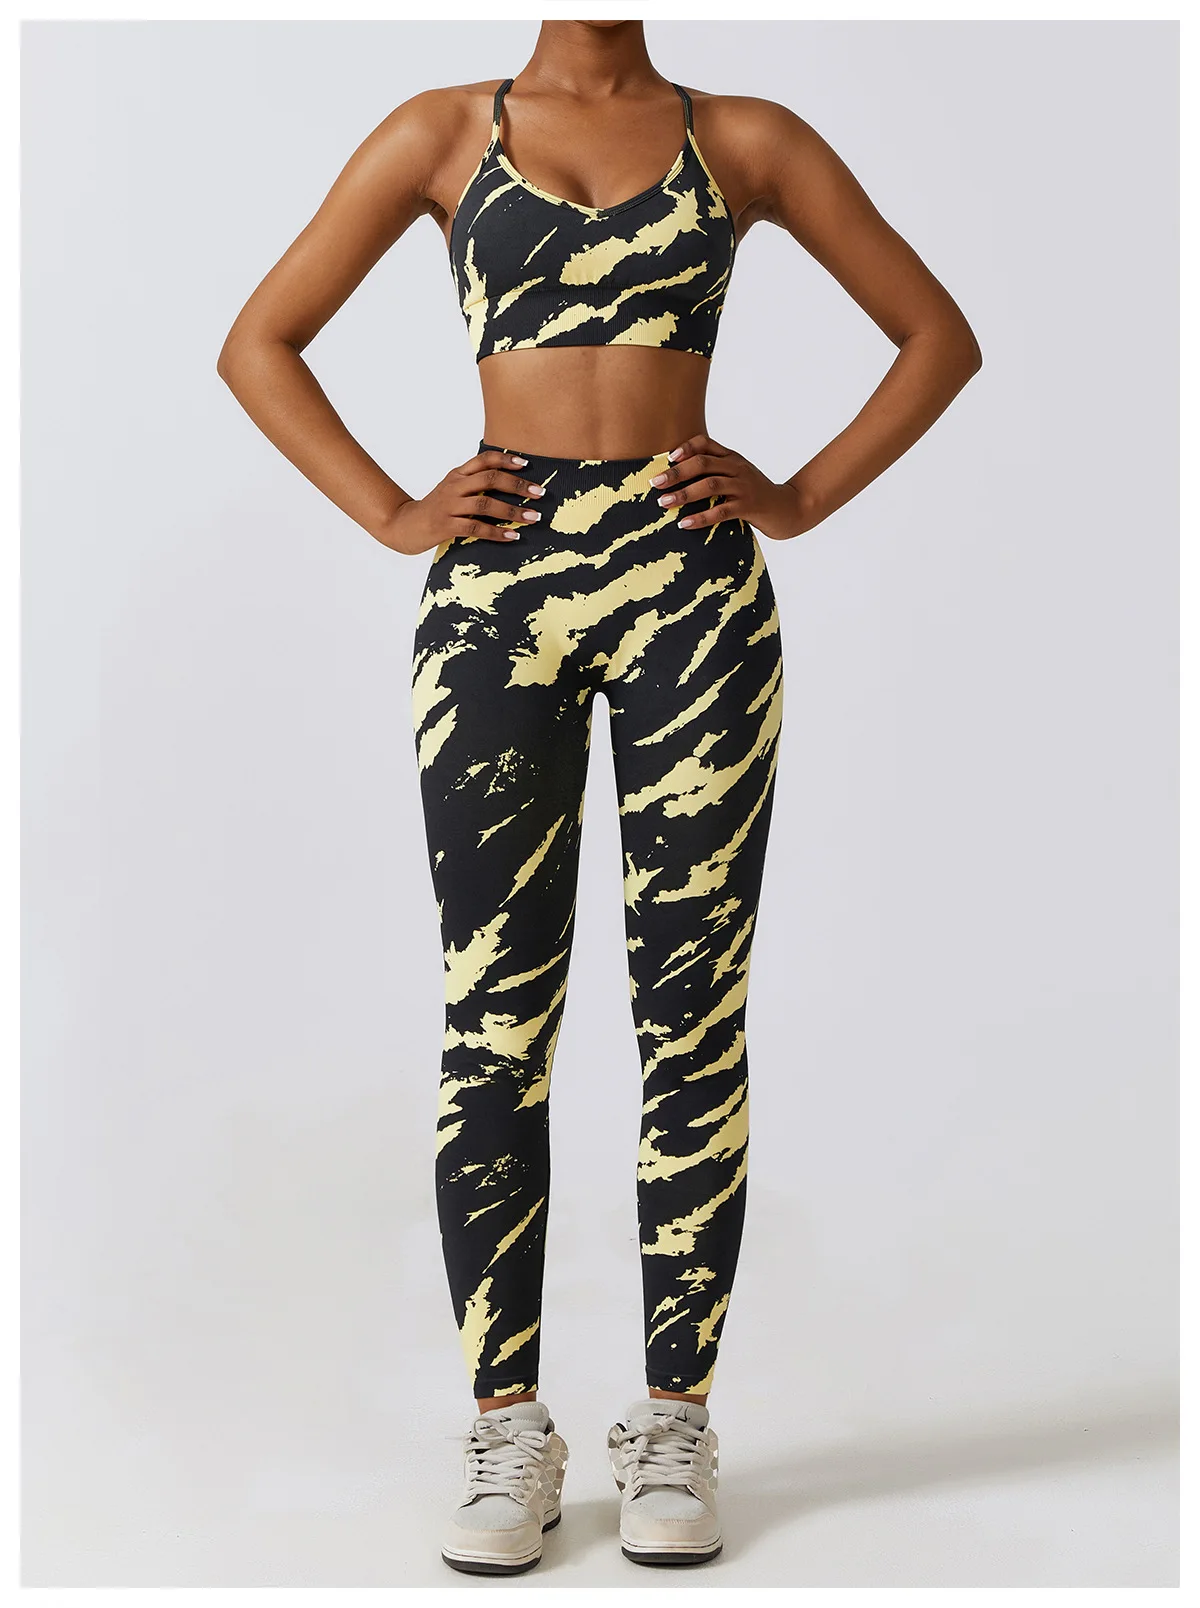 

Seamless High Waist Yoga Set for Girls, Personalized Print, Camo, Hip Lift, Running Sports, Fitness Pants, INS, American Fashion